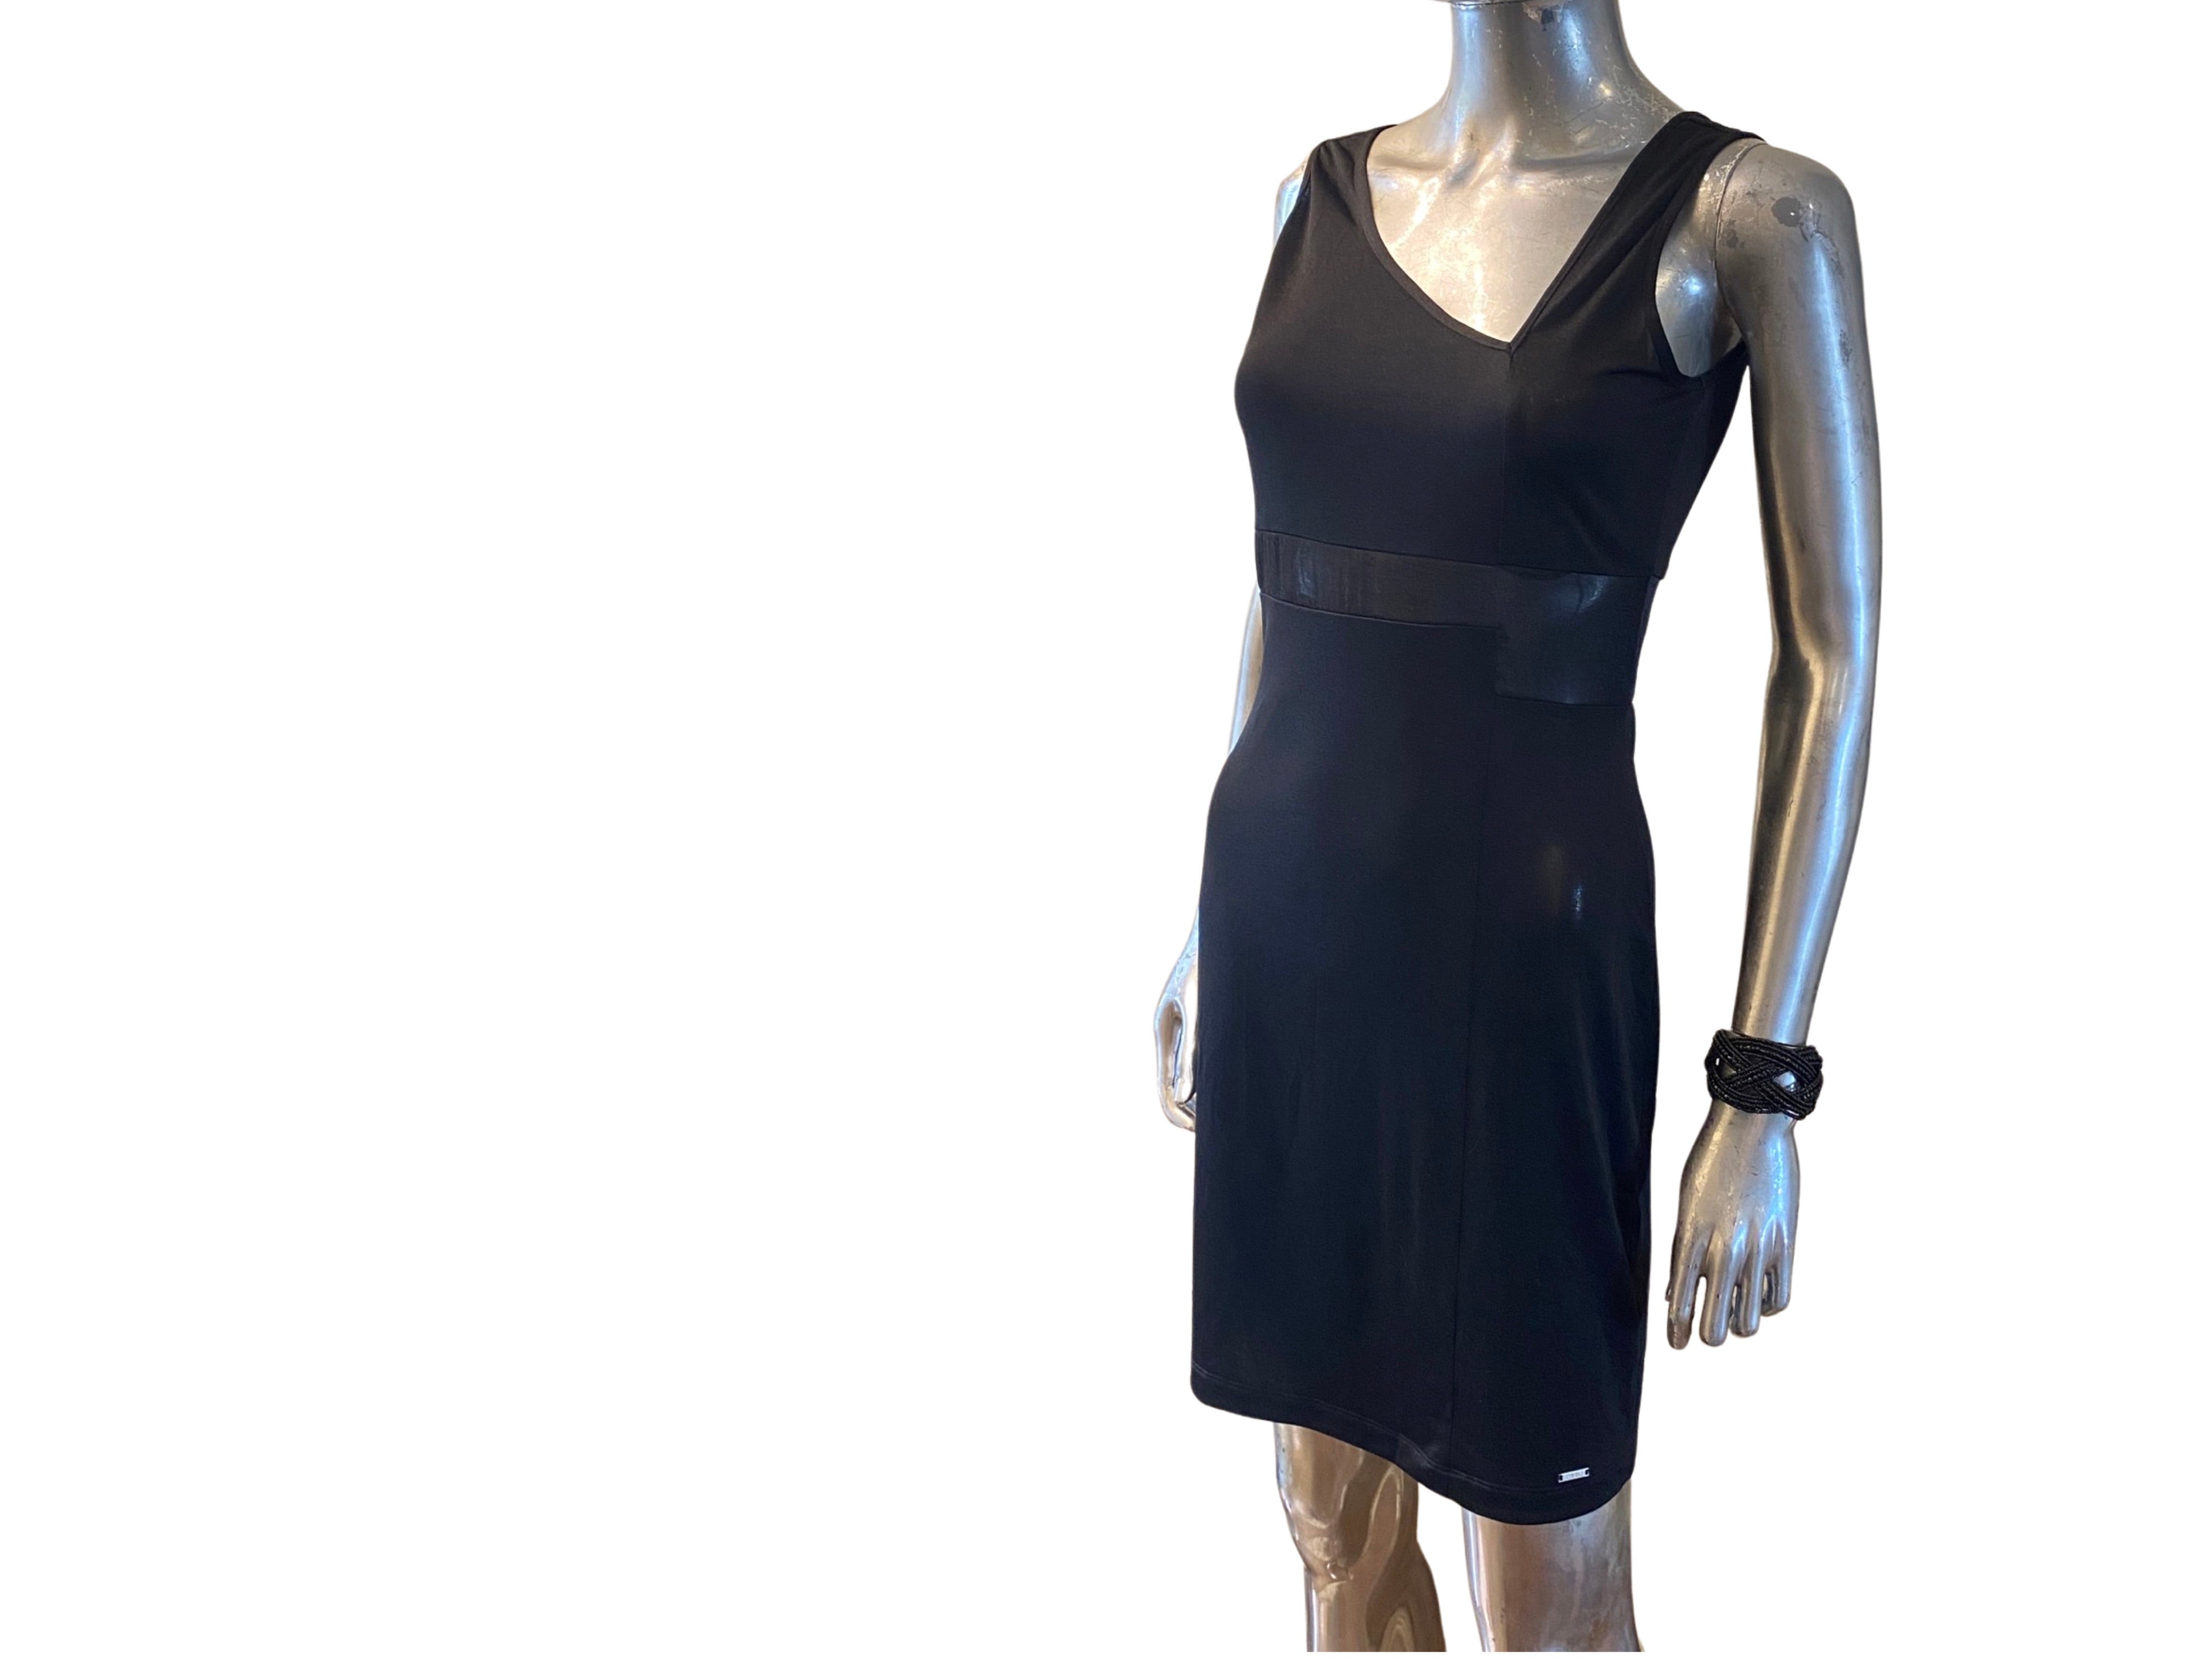 A very sexy simple casual knit dress by Italian company Extē. This dress is from the more contemporary Extē Jeans division. The dress has a very sexy asymmetrical neckline but the scene stealer is the geometric sheer jersey insert under the bust